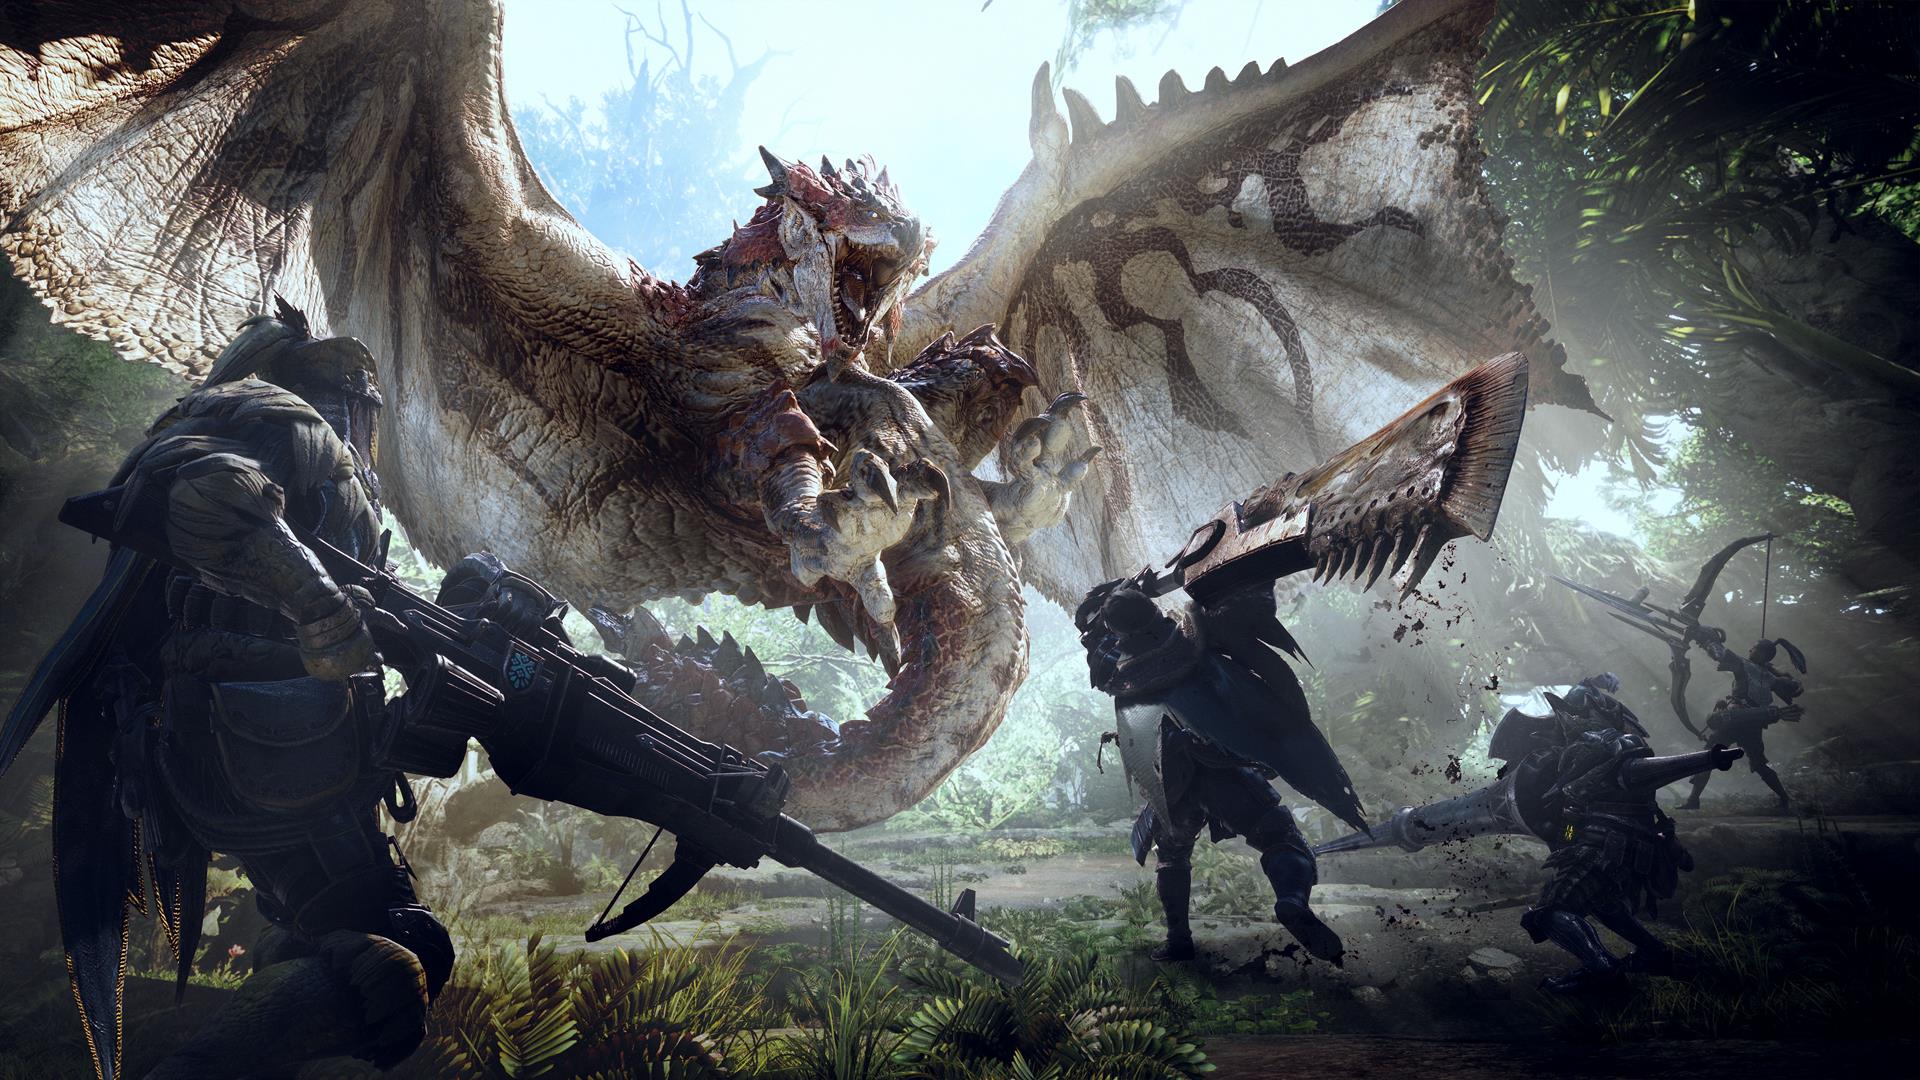 Image for Monster Hunter World looks like it has the potential to please fans and newcomers alike